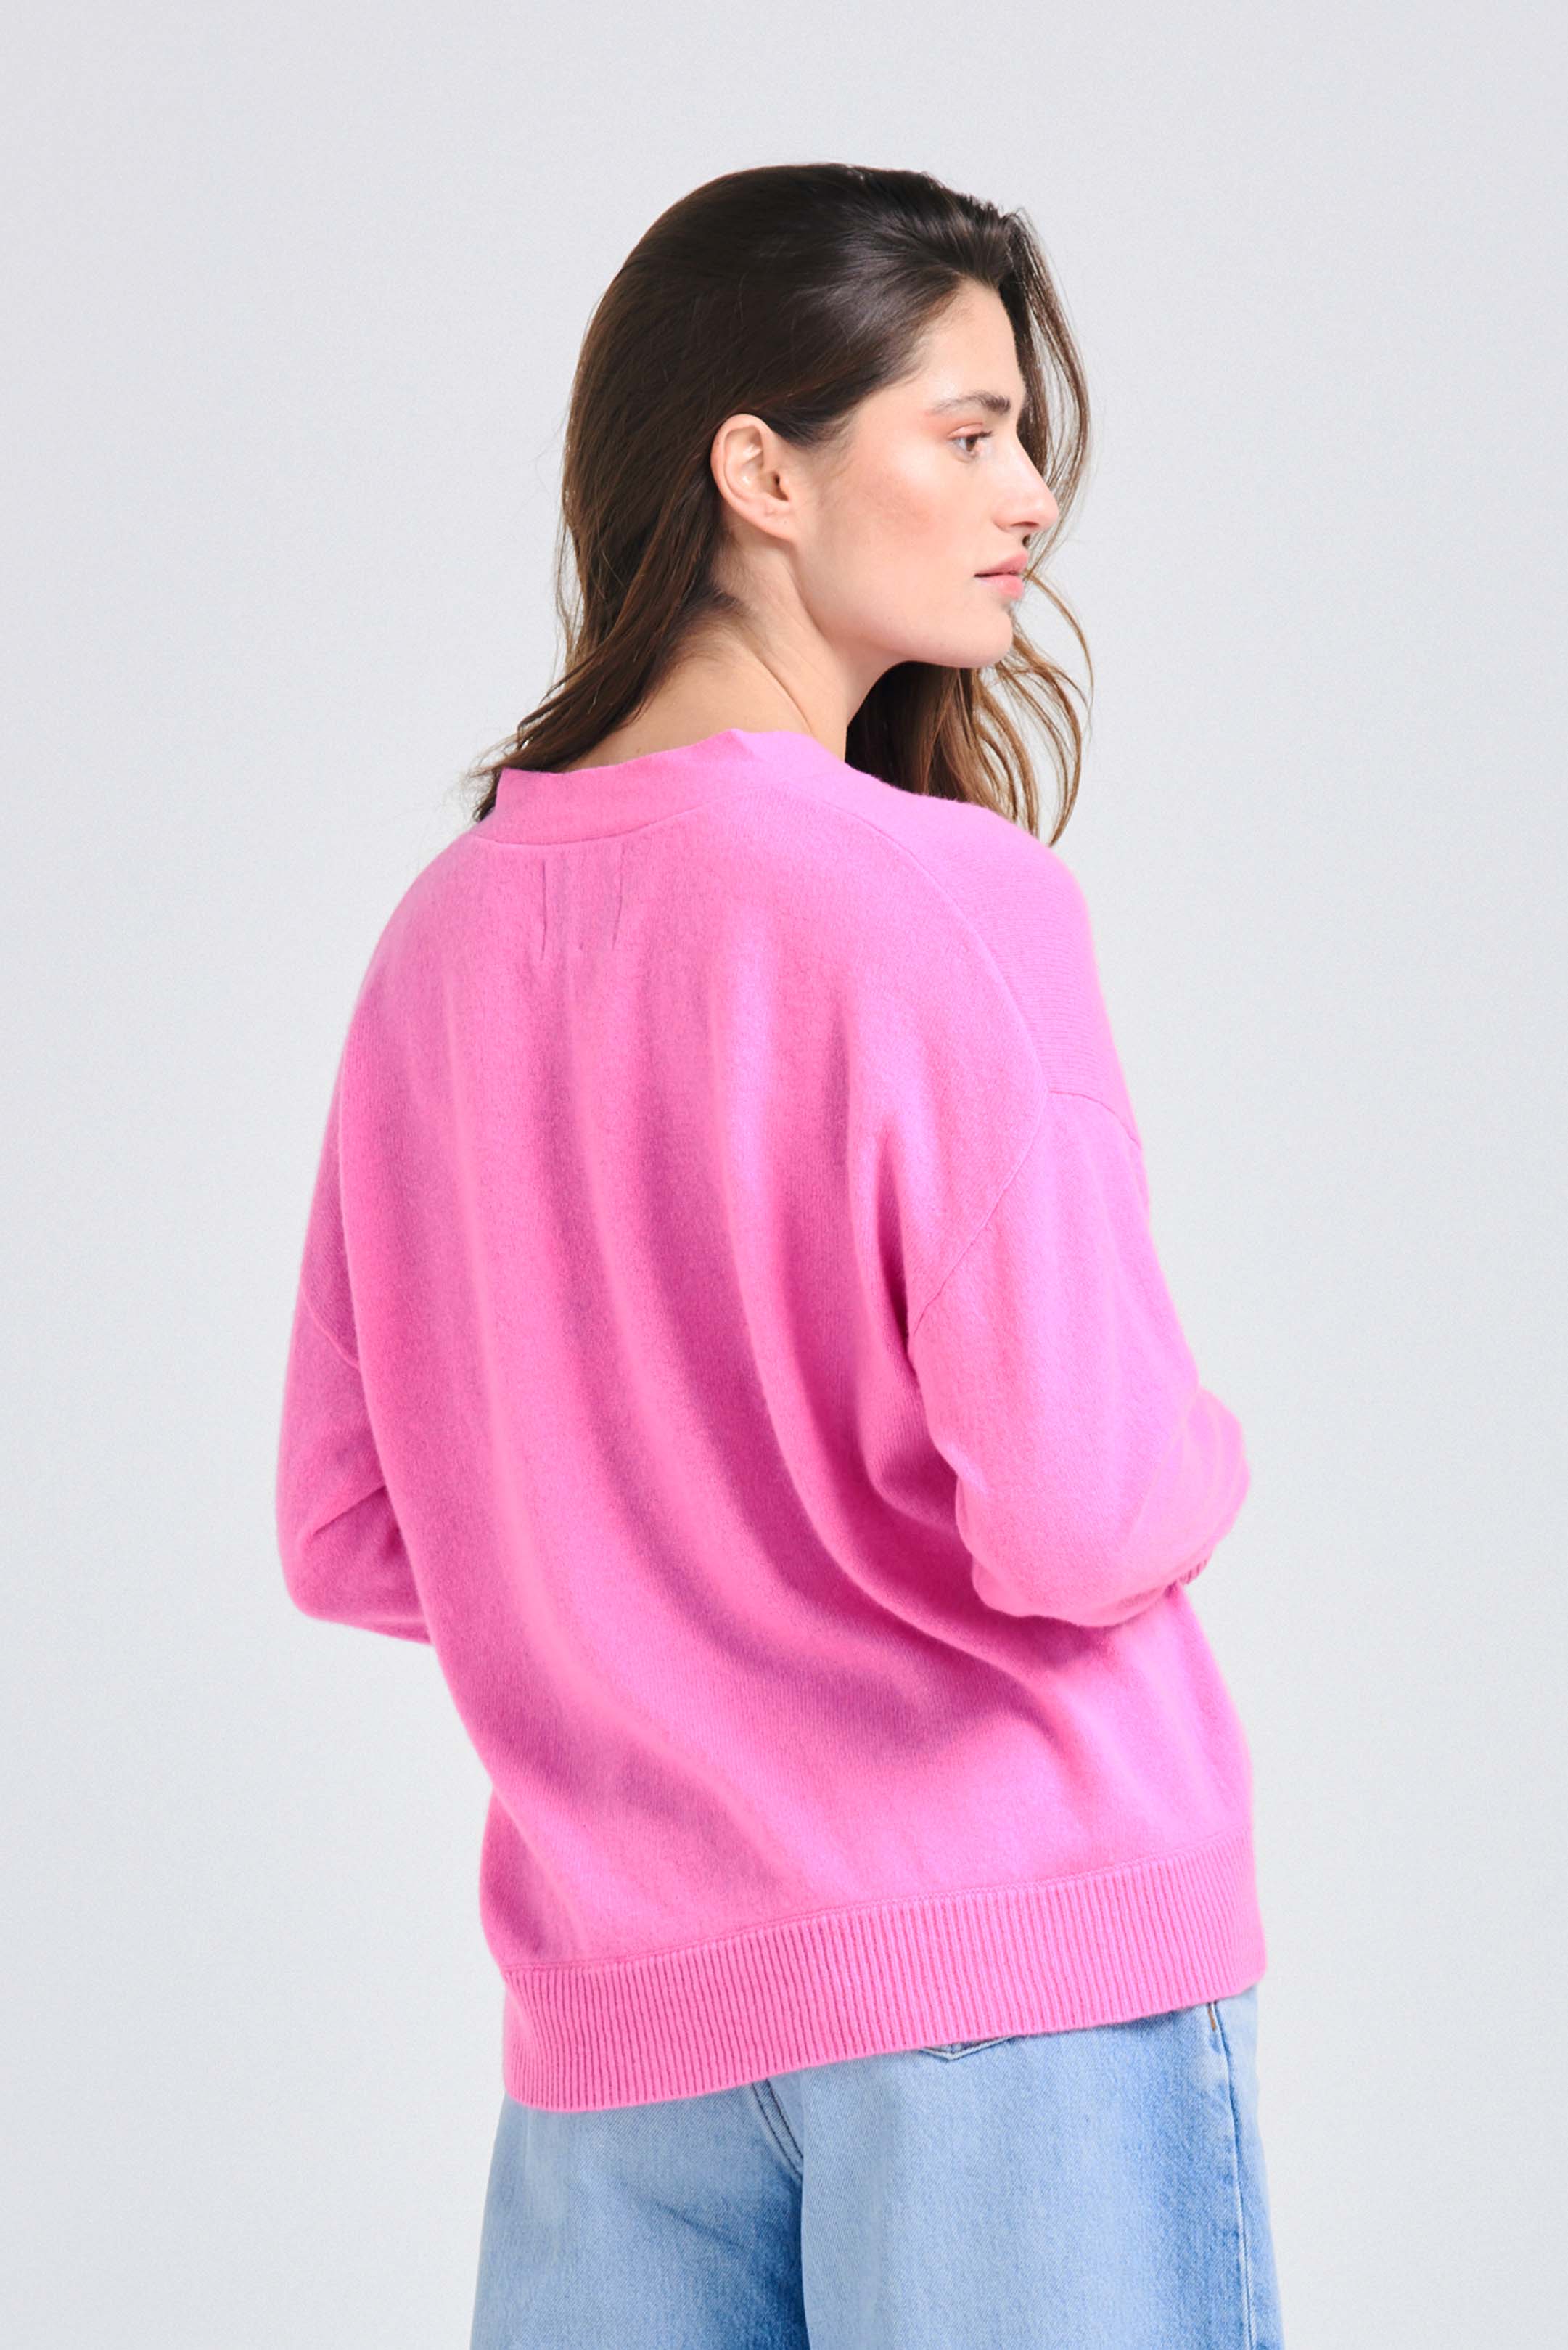 Brown haired female model wearing Jumper1234 Oversize cashmere vee neck cardigan in peony facing away from the camera